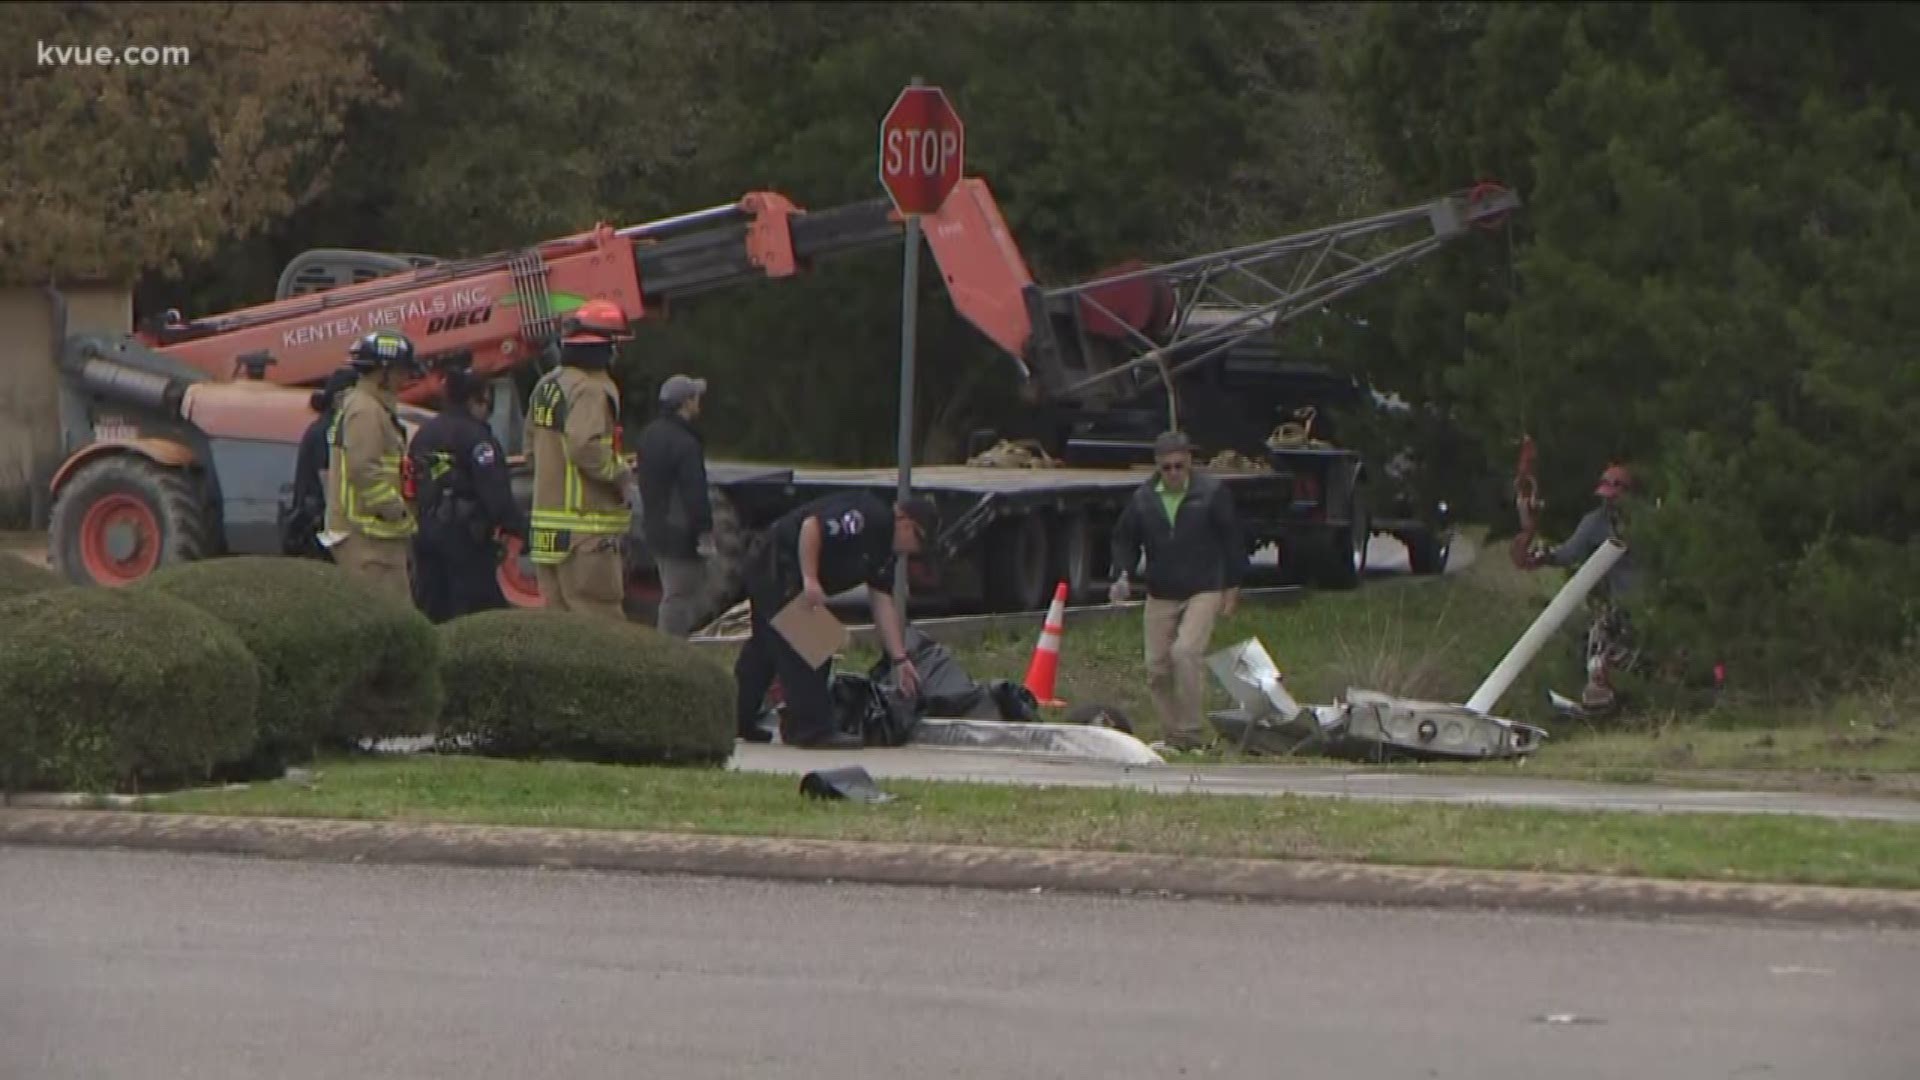 A man is still in critical condition after the plane he was in crashed near a Lakeway neighborhood Thursday.